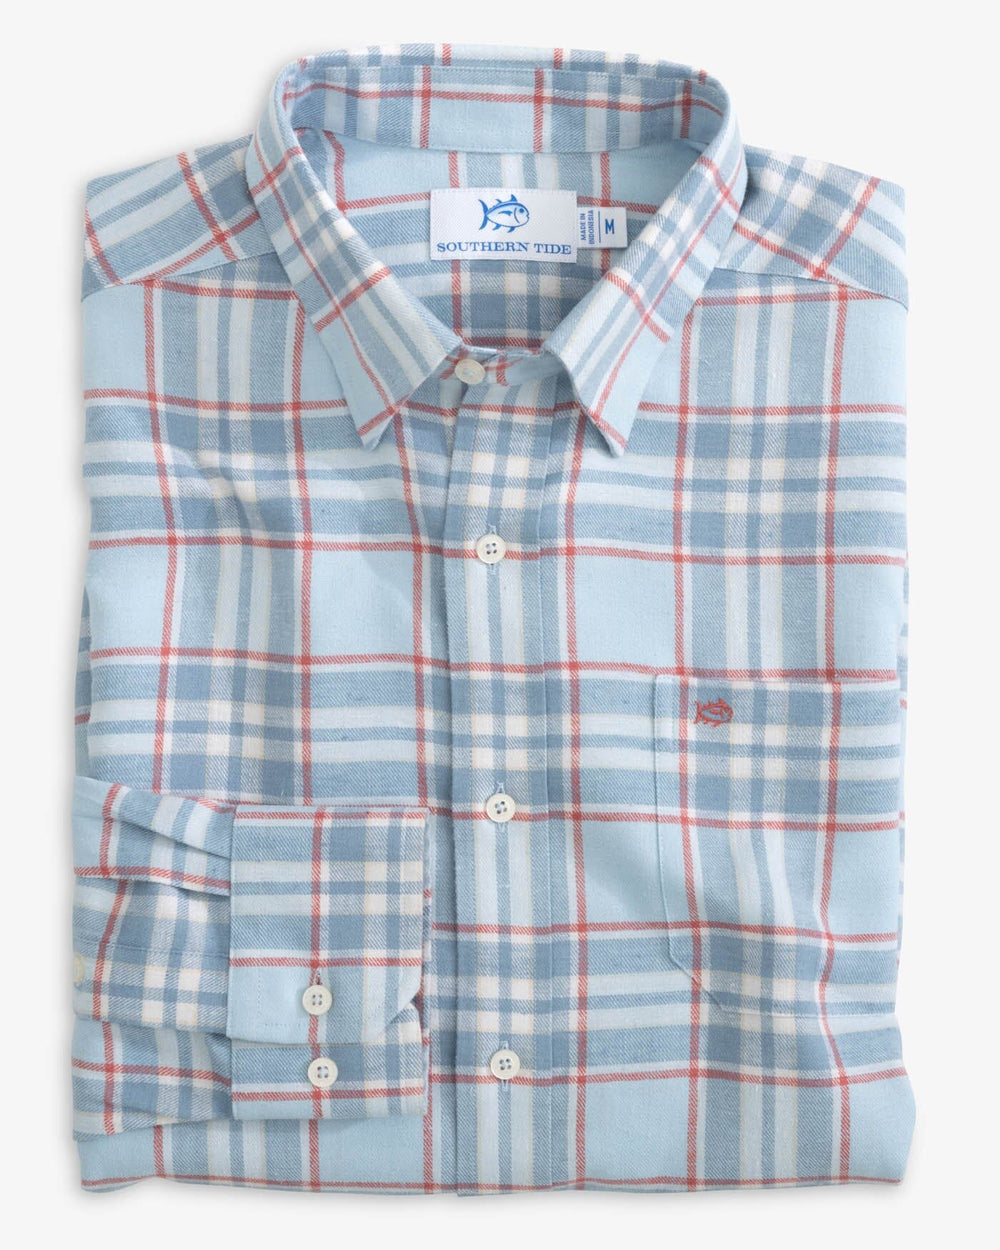 The folded view of the Southern Tide Beach Flannel Heather Reddick Plaid Sport Shirt by Southern Tide - Heather Dream Blue